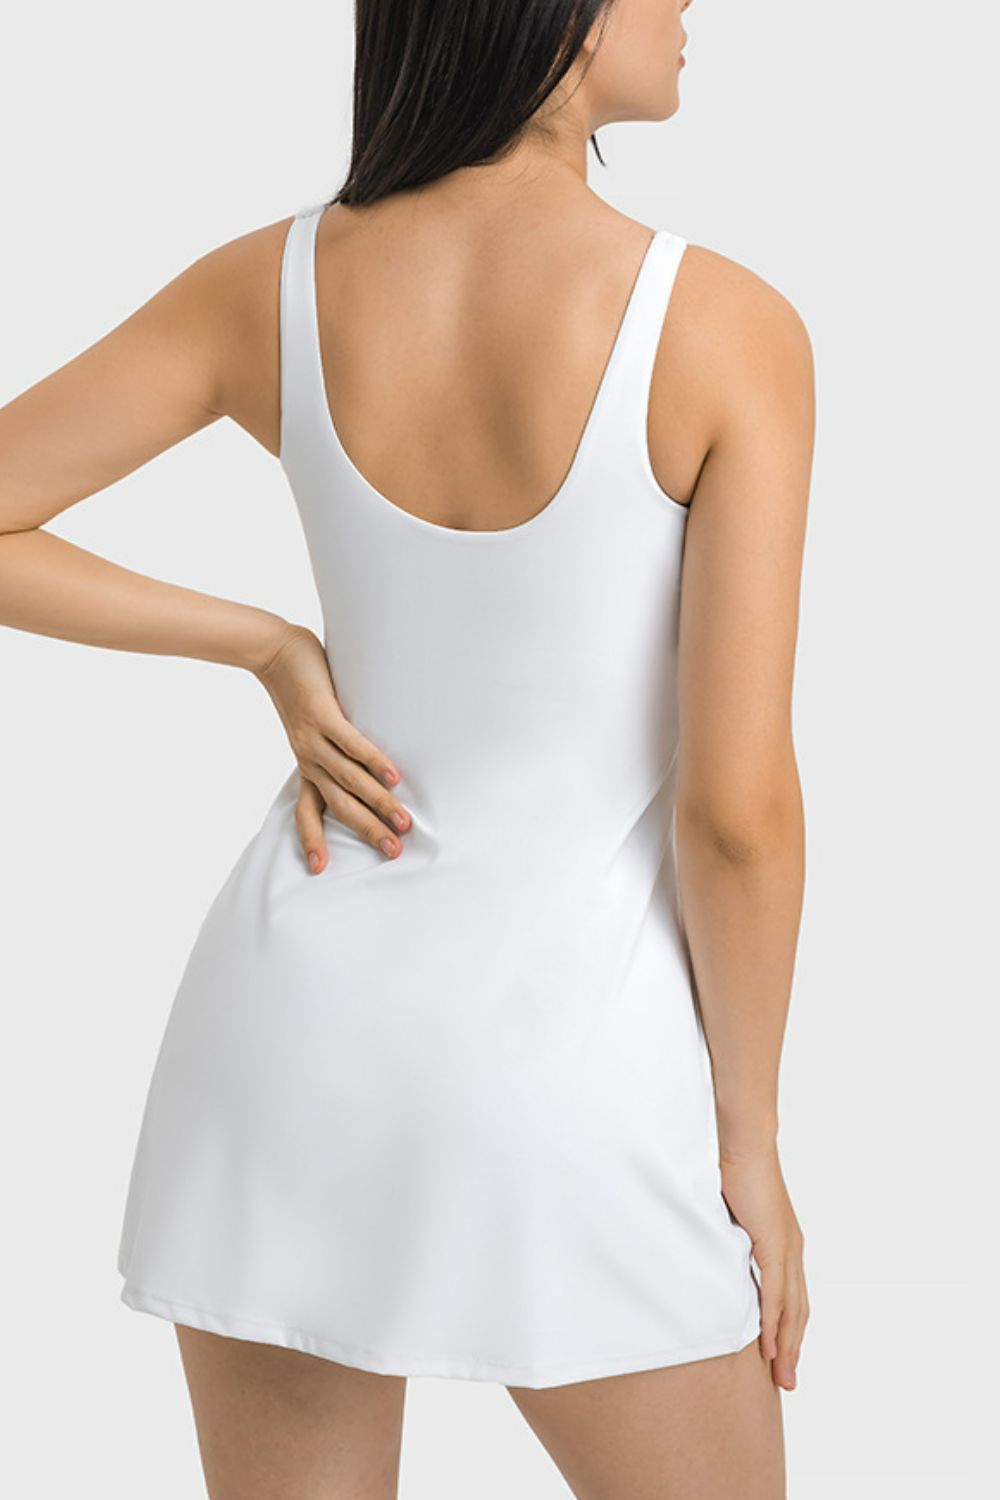 Sports Tank Dress with Built In Shorts